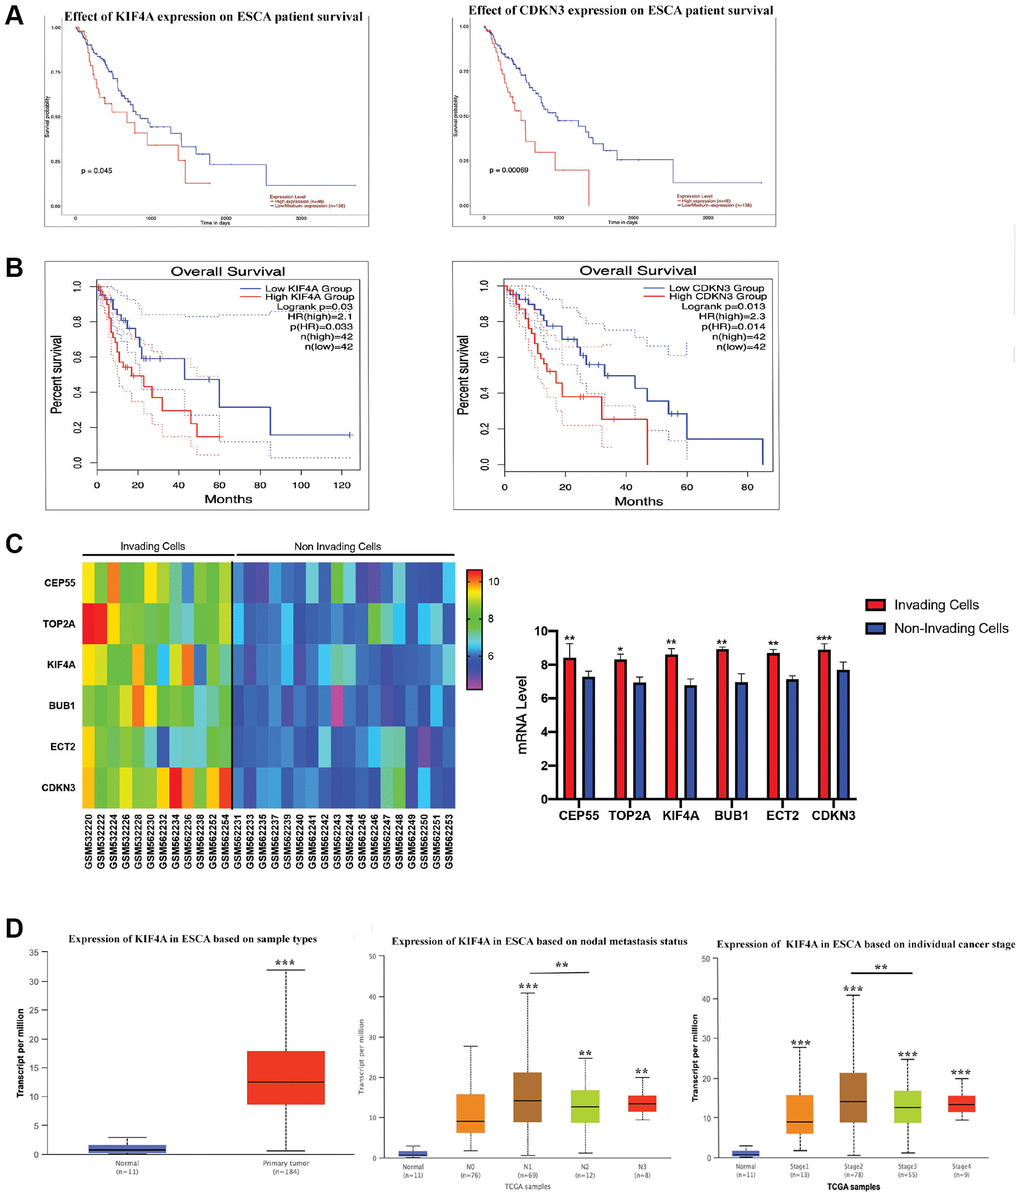 The survival analyses for hub genes. CDKN3 and KIF4A were identified to have an adverse effect on the prognosis of overall survival for patients with ESCC by UALCAN (A) and GEPIA2 (B) analysis. Gene expression of 6 hub genes between invading and non-invading cells based on the GSE21293 (C). Association between clinical staging, nodal metastasis status of ESCC and expression levels of the KIF4A by UALCAN analysis (D).